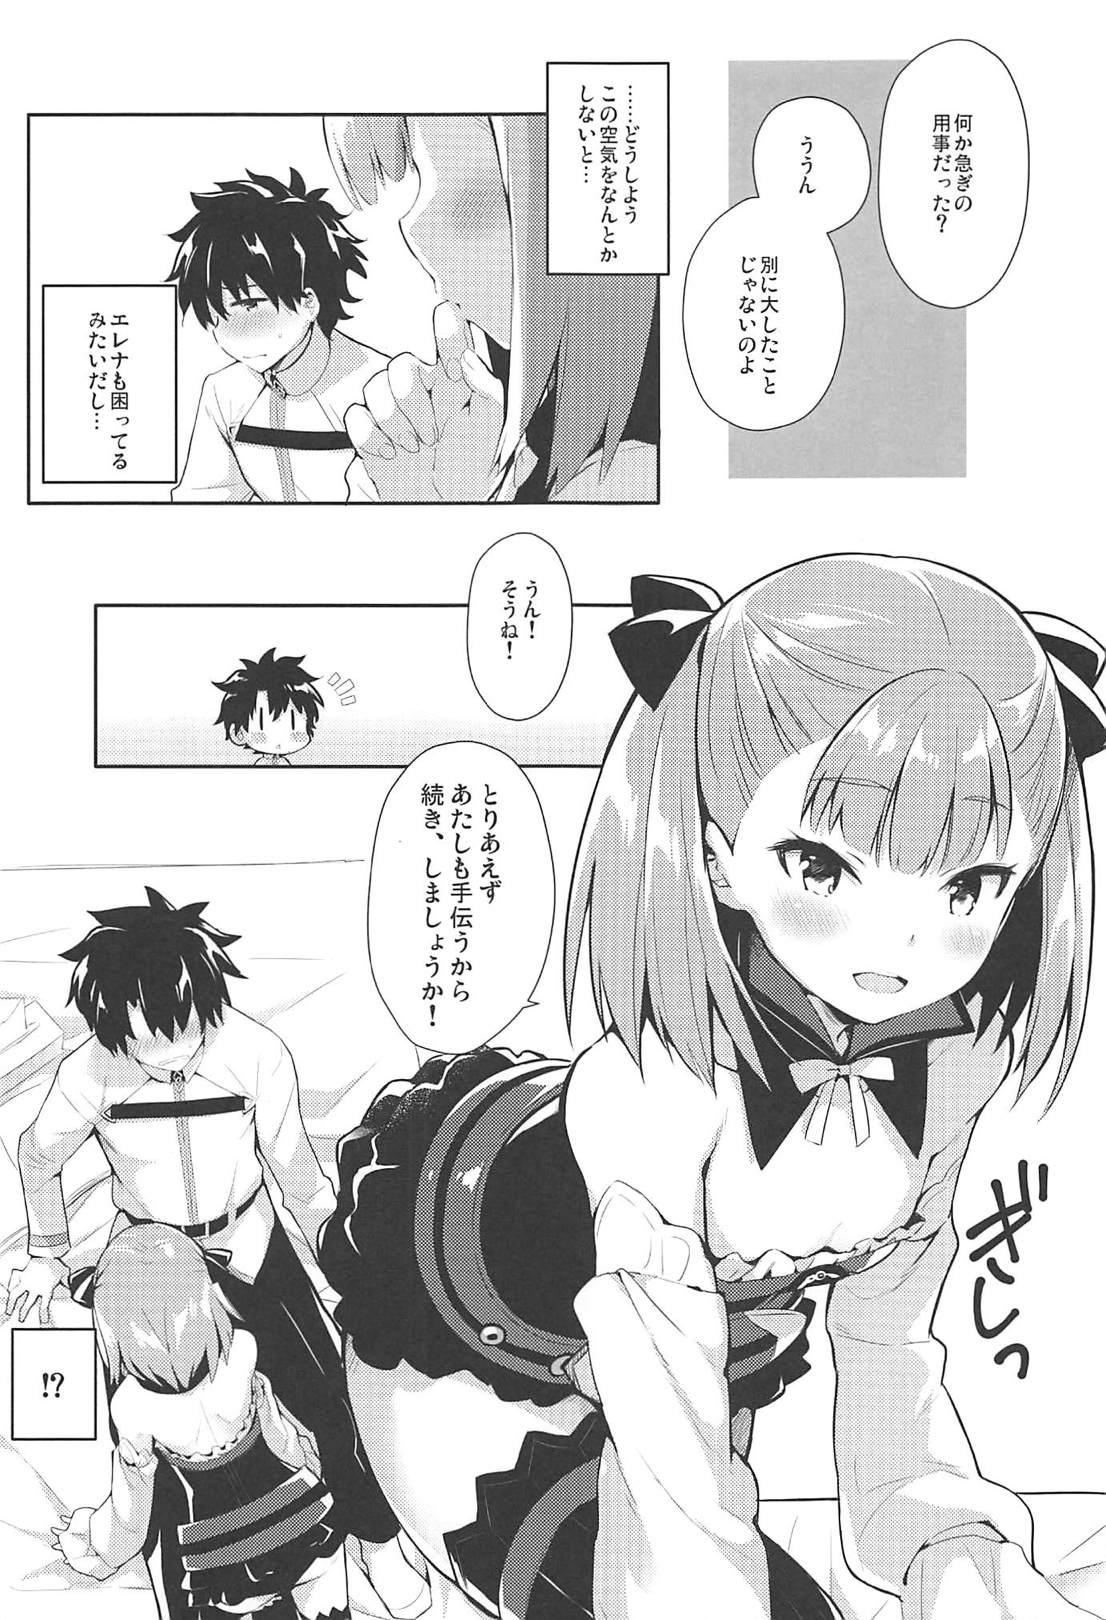 Missionary Porn Amaechattemo Yokutteyo! - Fate grand order Camera - Page 6